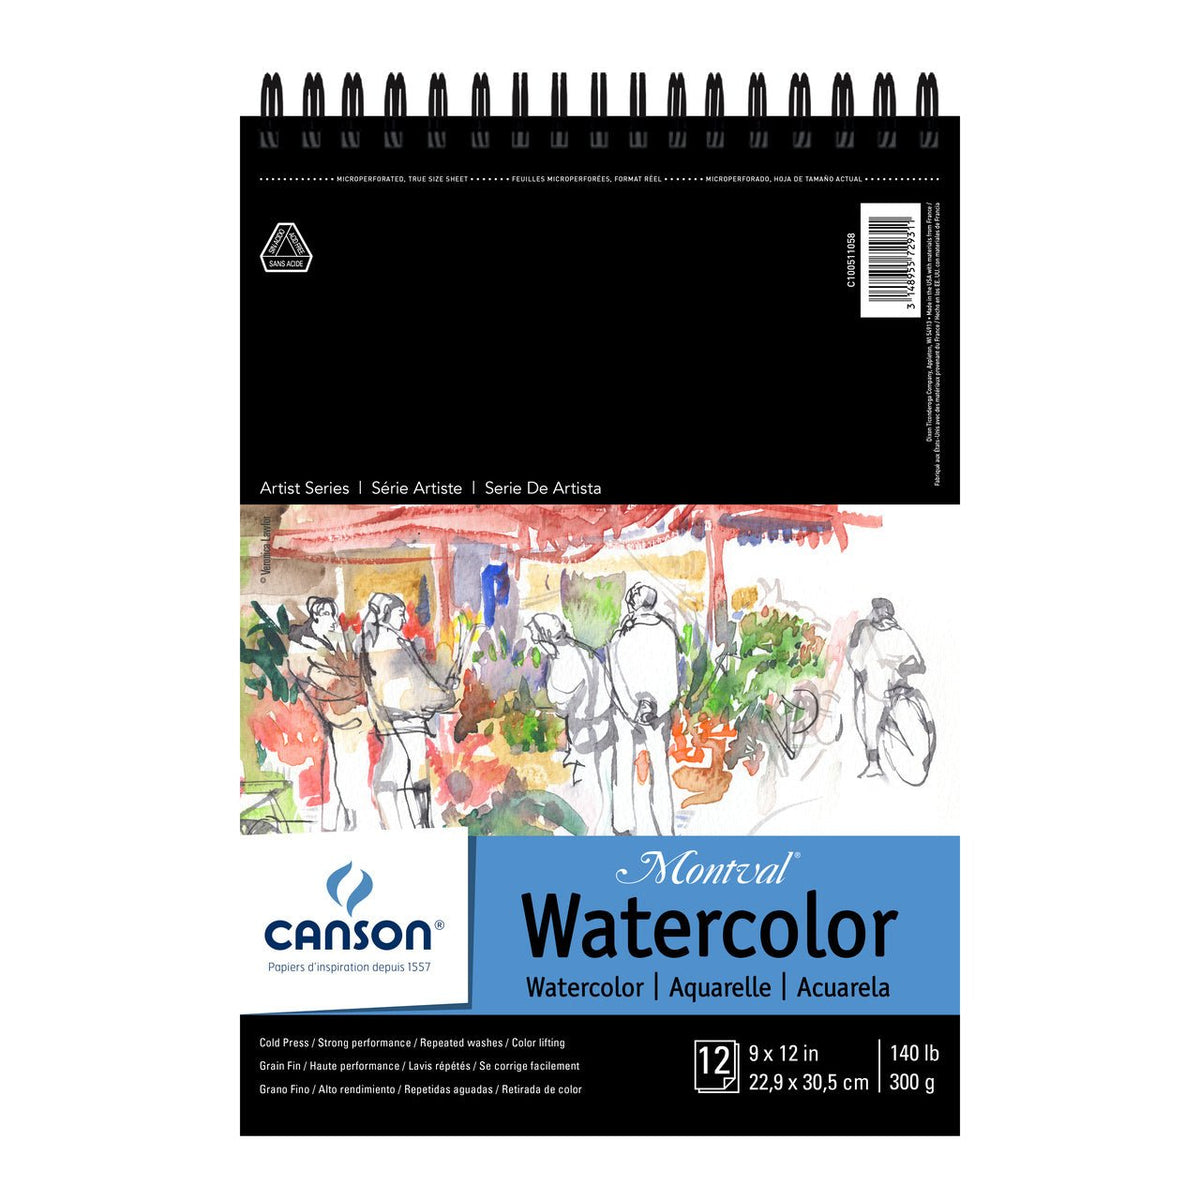 Canson XL Watercolor Paper Pad 9x12 30 Sheets